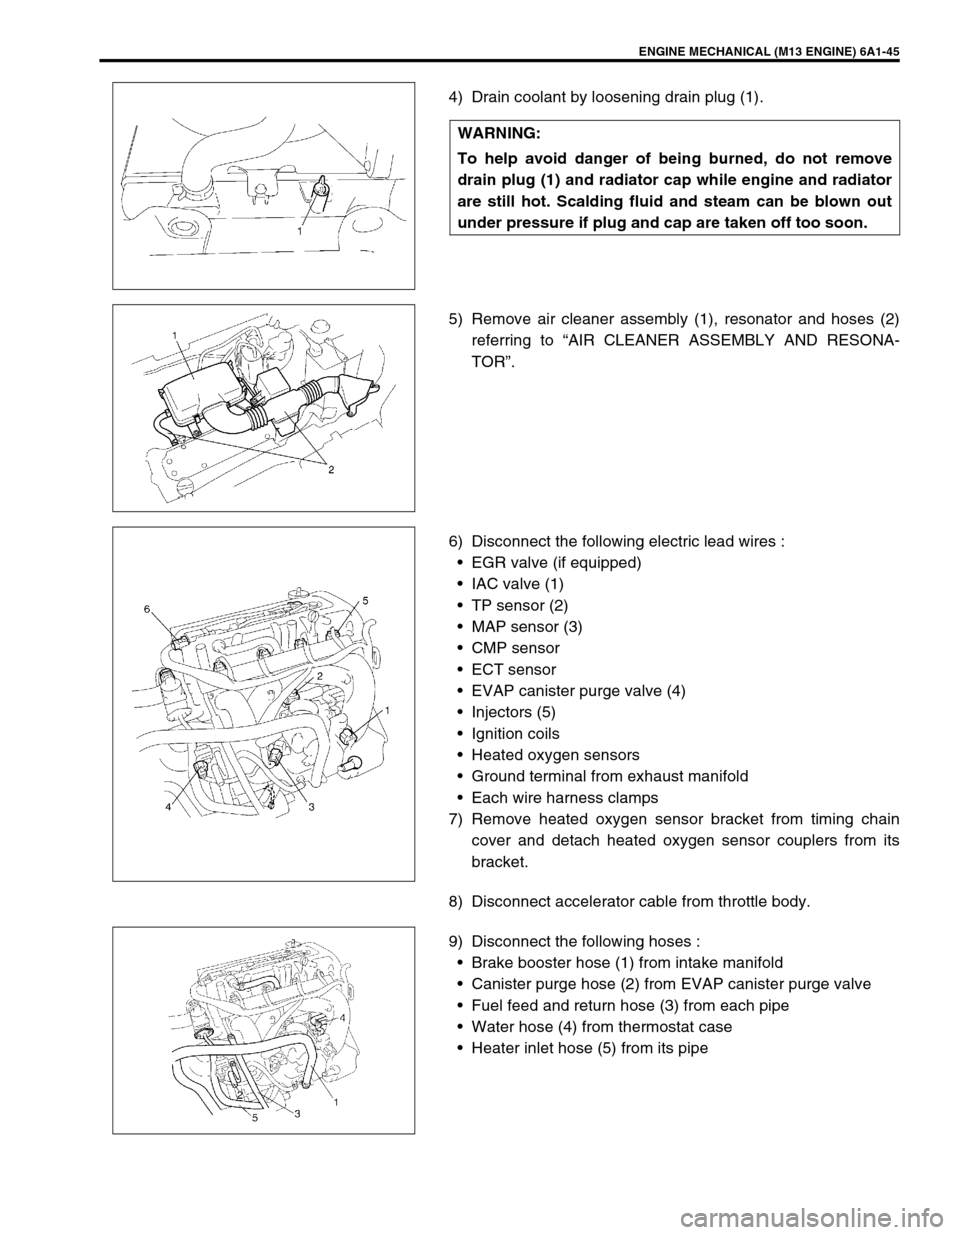 SUZUKI SWIFT 2000 1.G RG413 Service Workshop Manual ENGINE MECHANICAL (M13 ENGINE) 6A1-45
4) Drain coolant by loosening drain plug (1).
5) Remove air cleaner assembly (1), resonator and hoses (2)
referring to “AIR CLEANER ASSEMBLY AND RESONA-
TOR”.